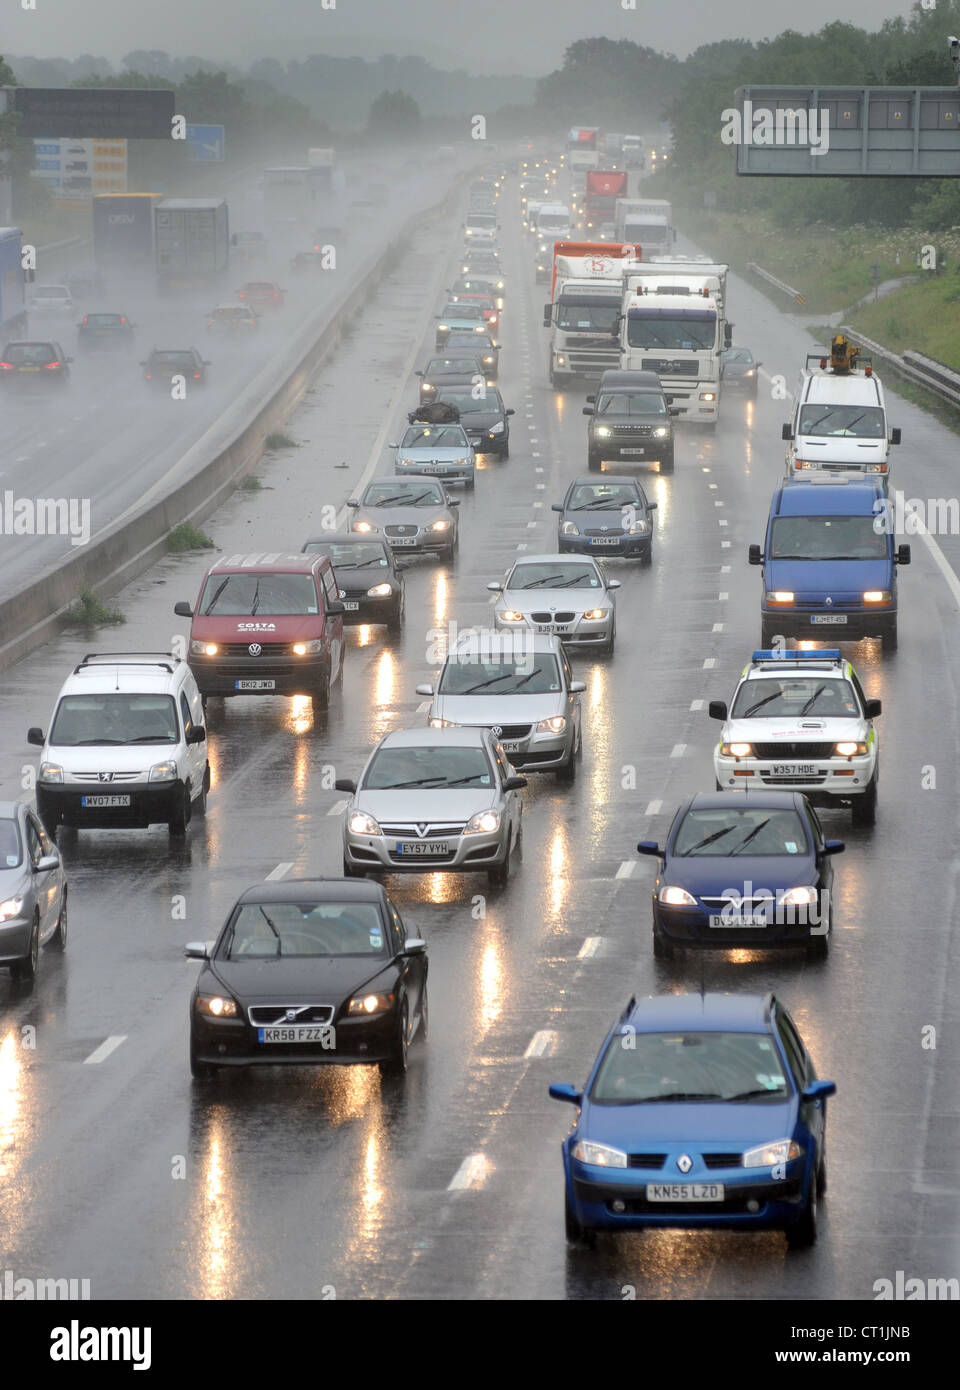 HEAVY TRAFFIC IN WET RAINY WEATHER CONDITIONS ON THE M6 MOTORWAY NEAR STAFFORD ENGLAND RE DRIVING CONDITIONS RAIN VISIBILITY UK Stock Photo